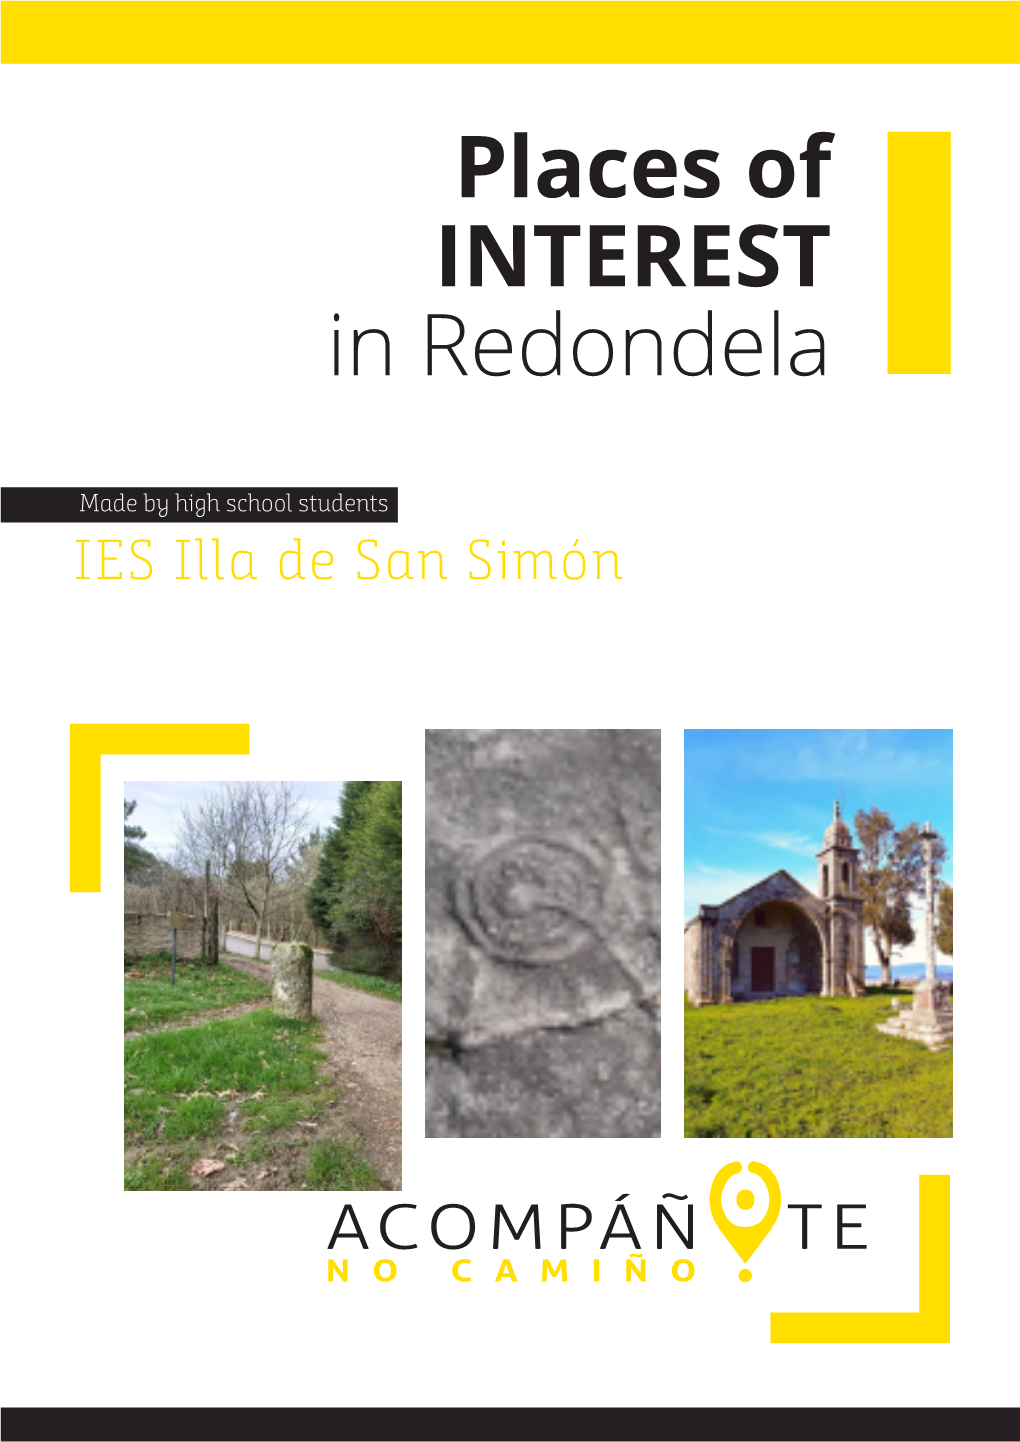 Places of Interest in Redondela